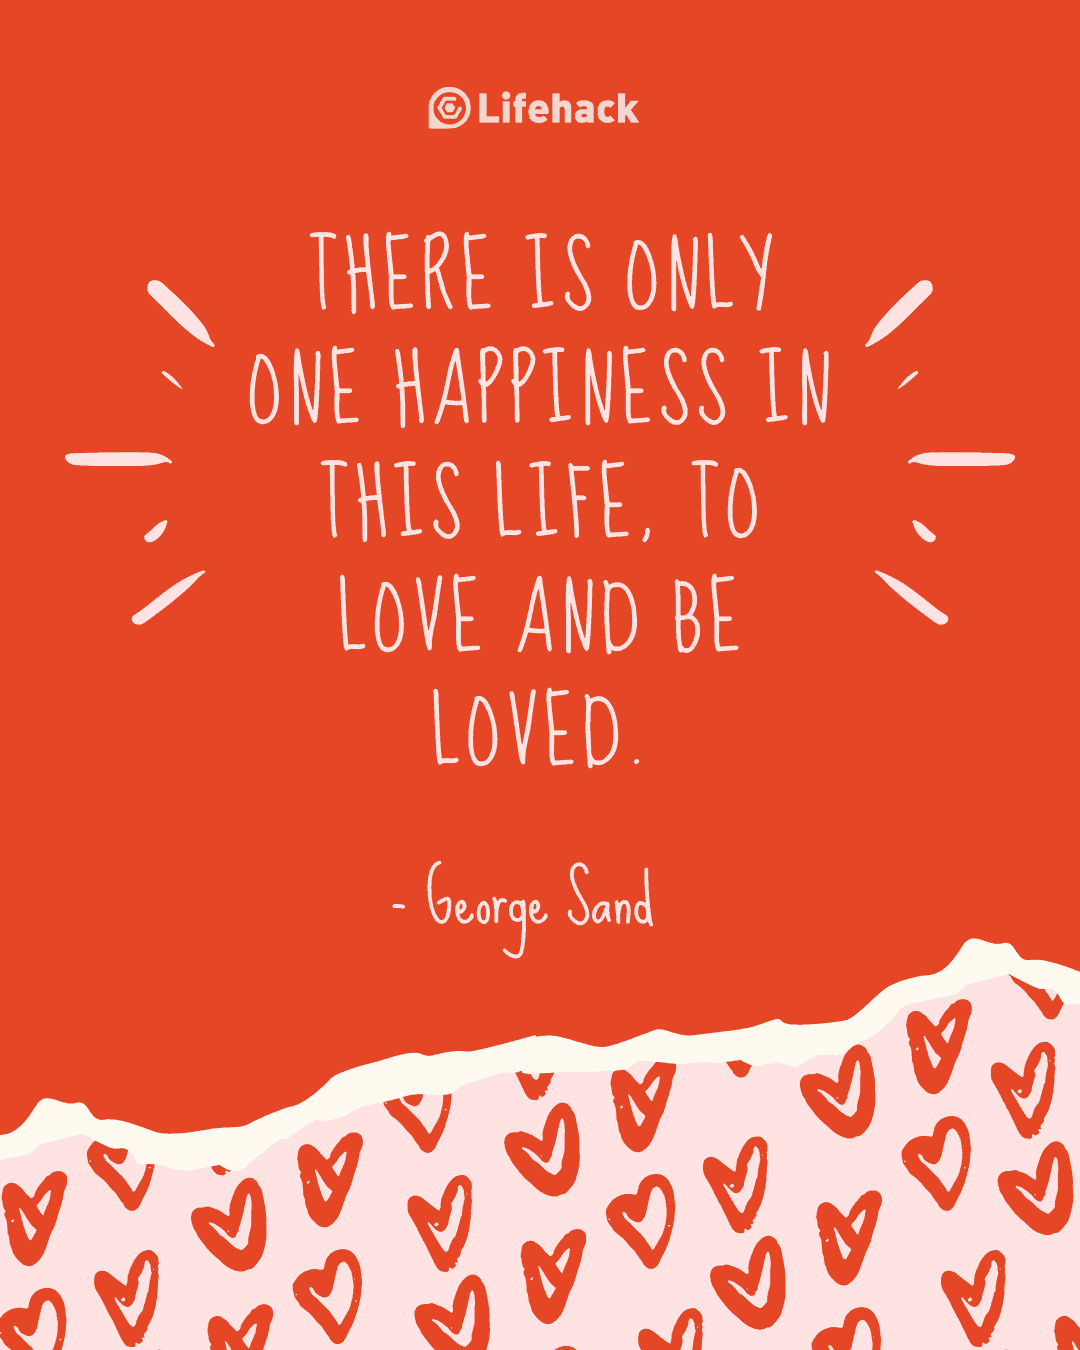 21 Happy Quotes About the Meaning of True Happiness